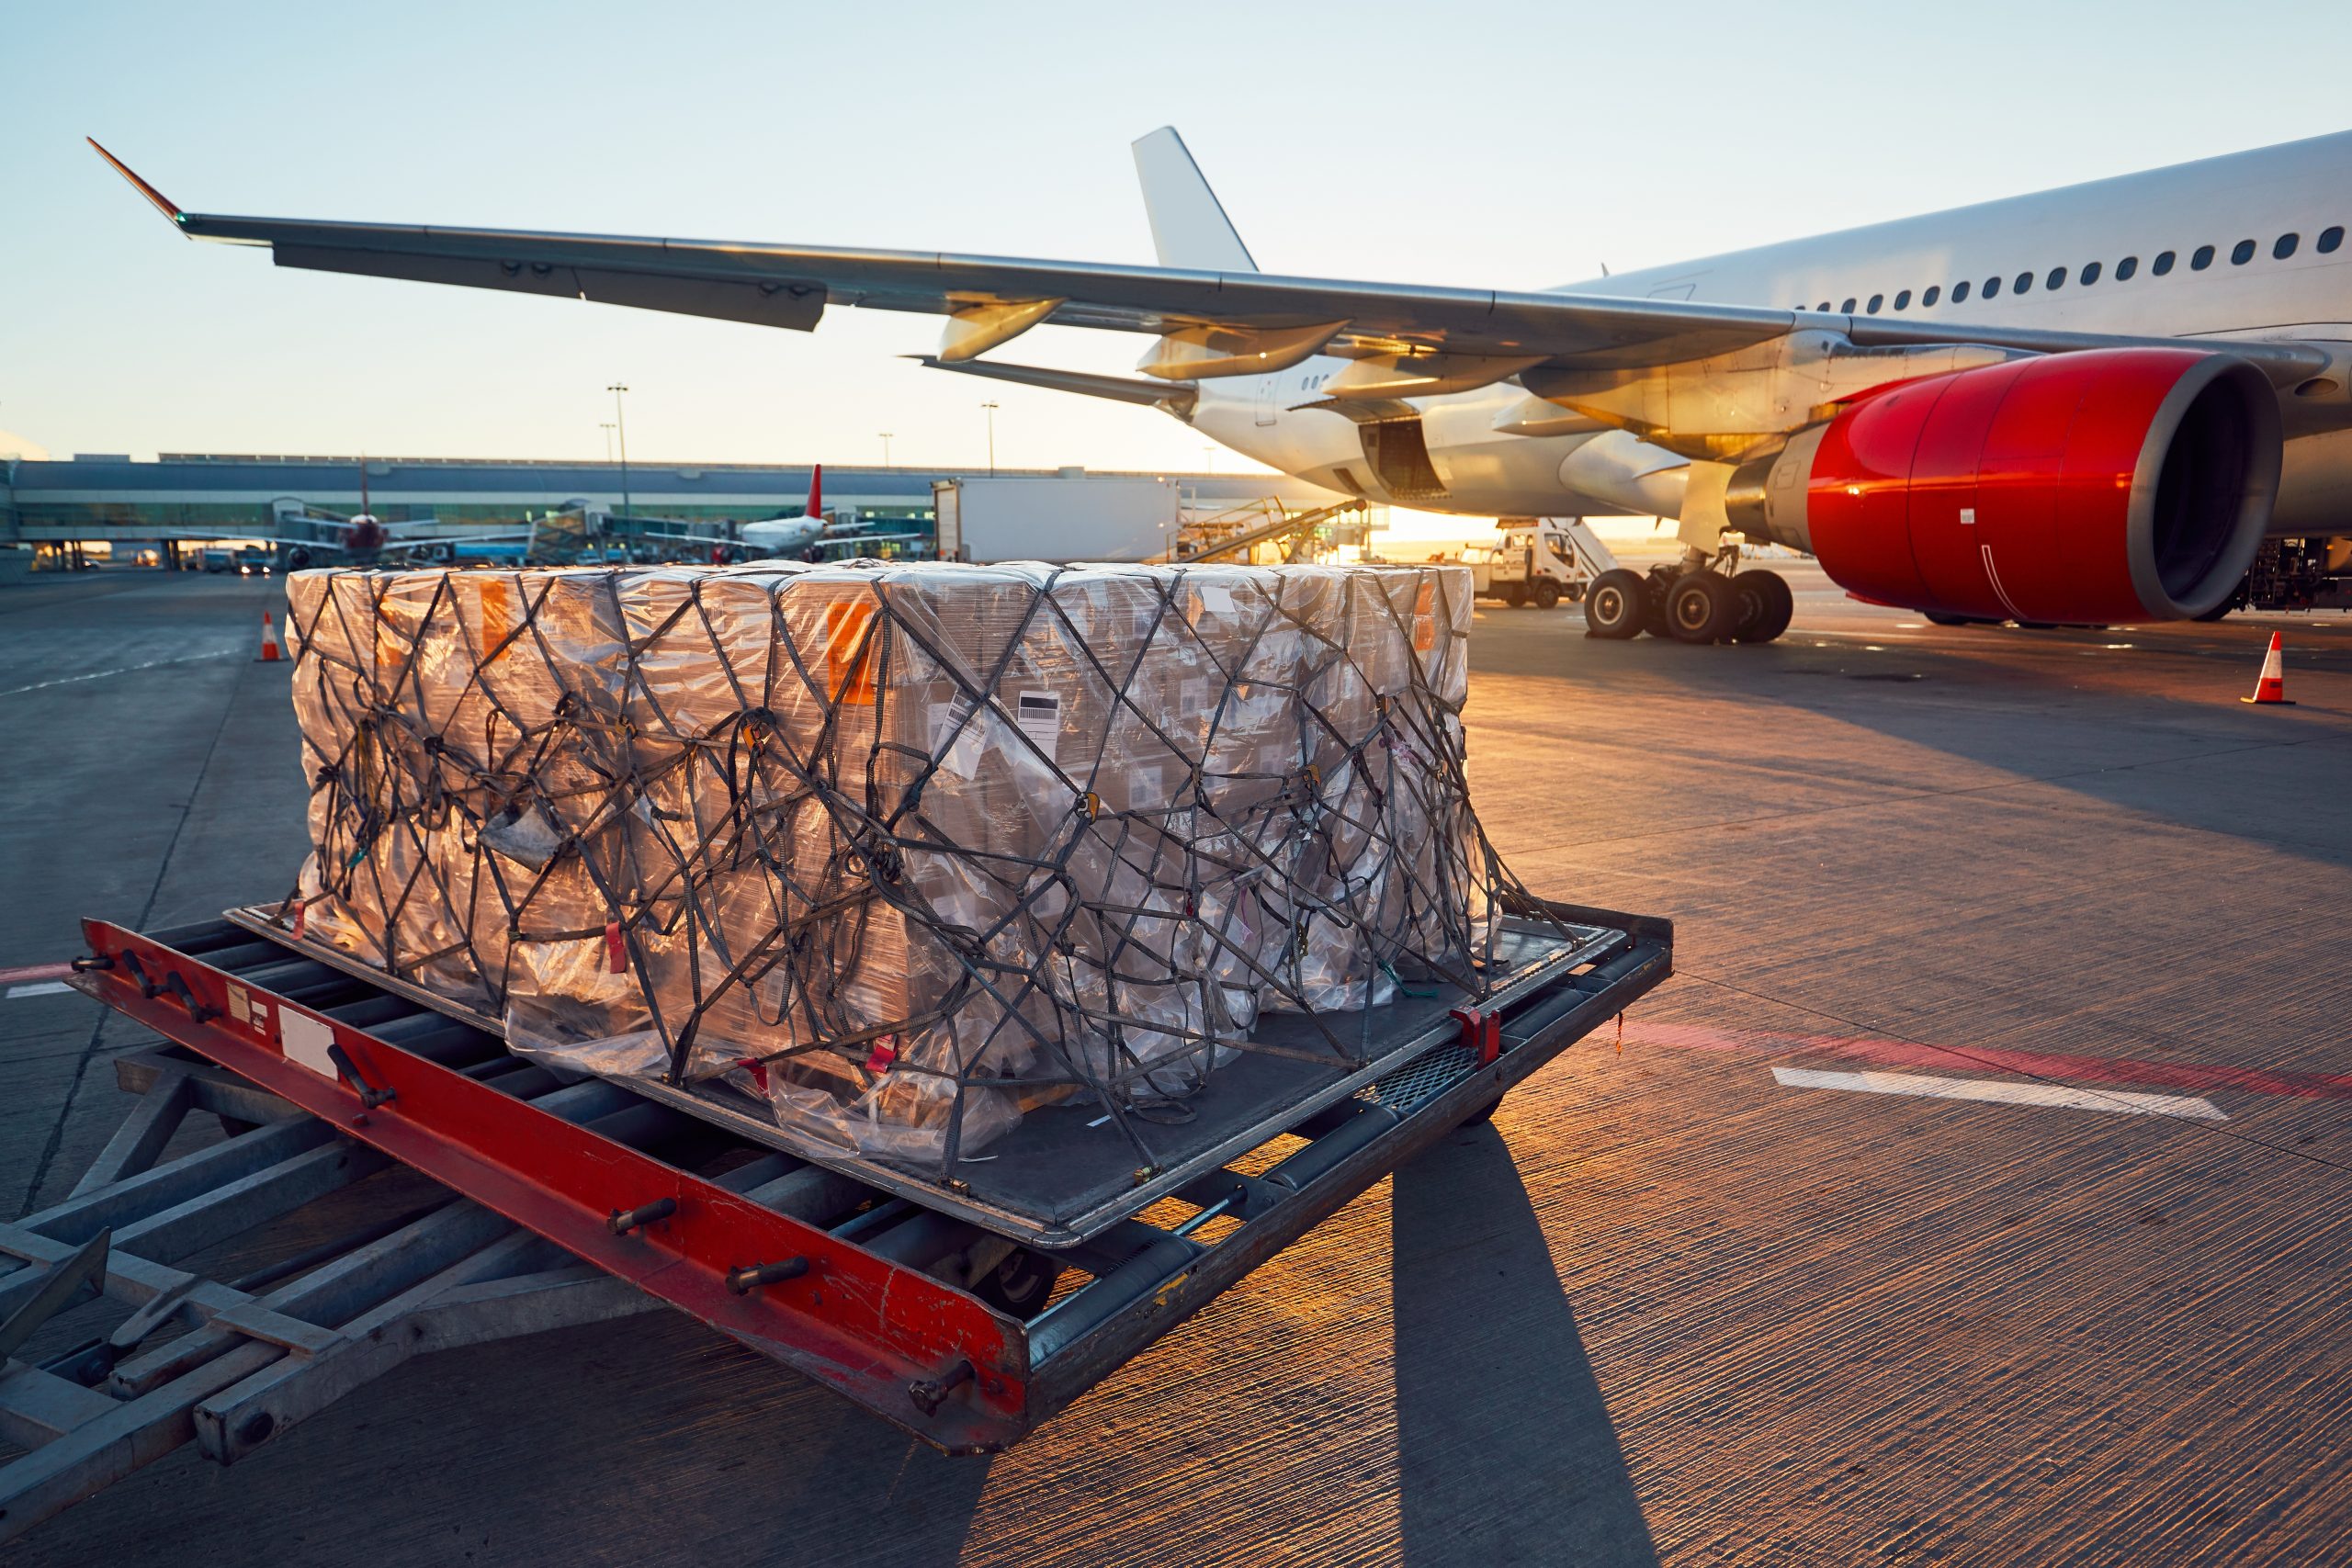 All About Air Freight ULDs (Unit Loading Devices)